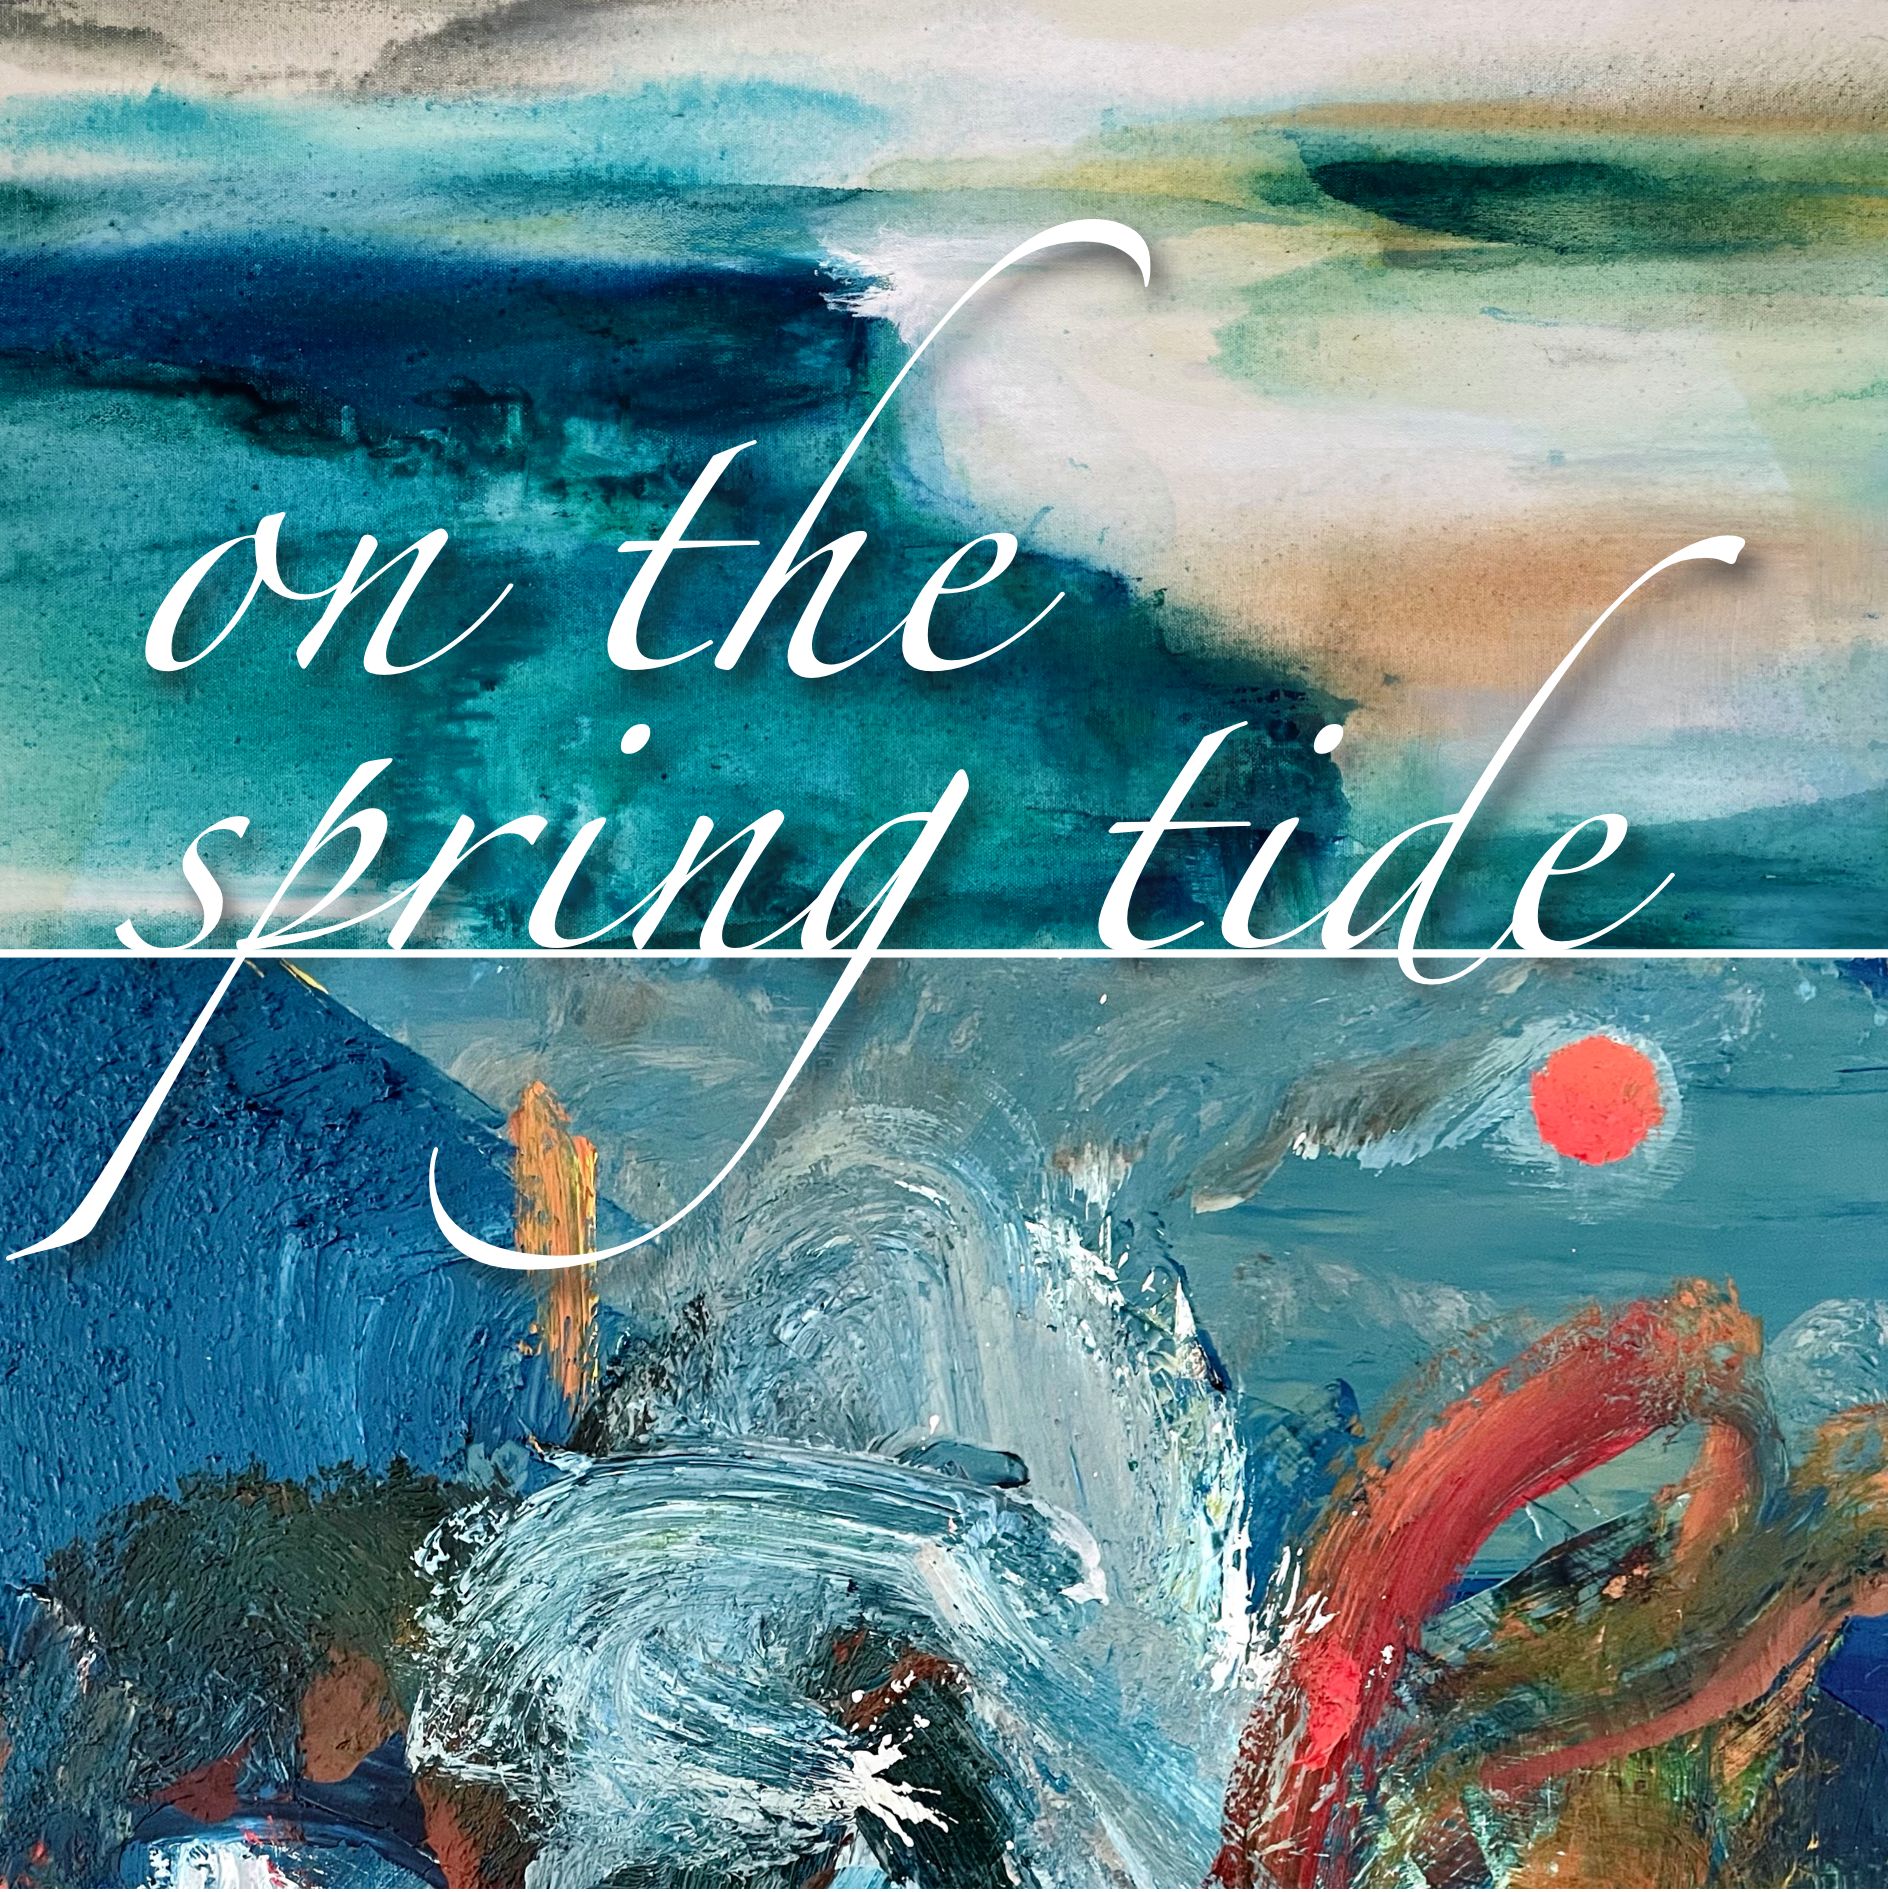 on the spring tide